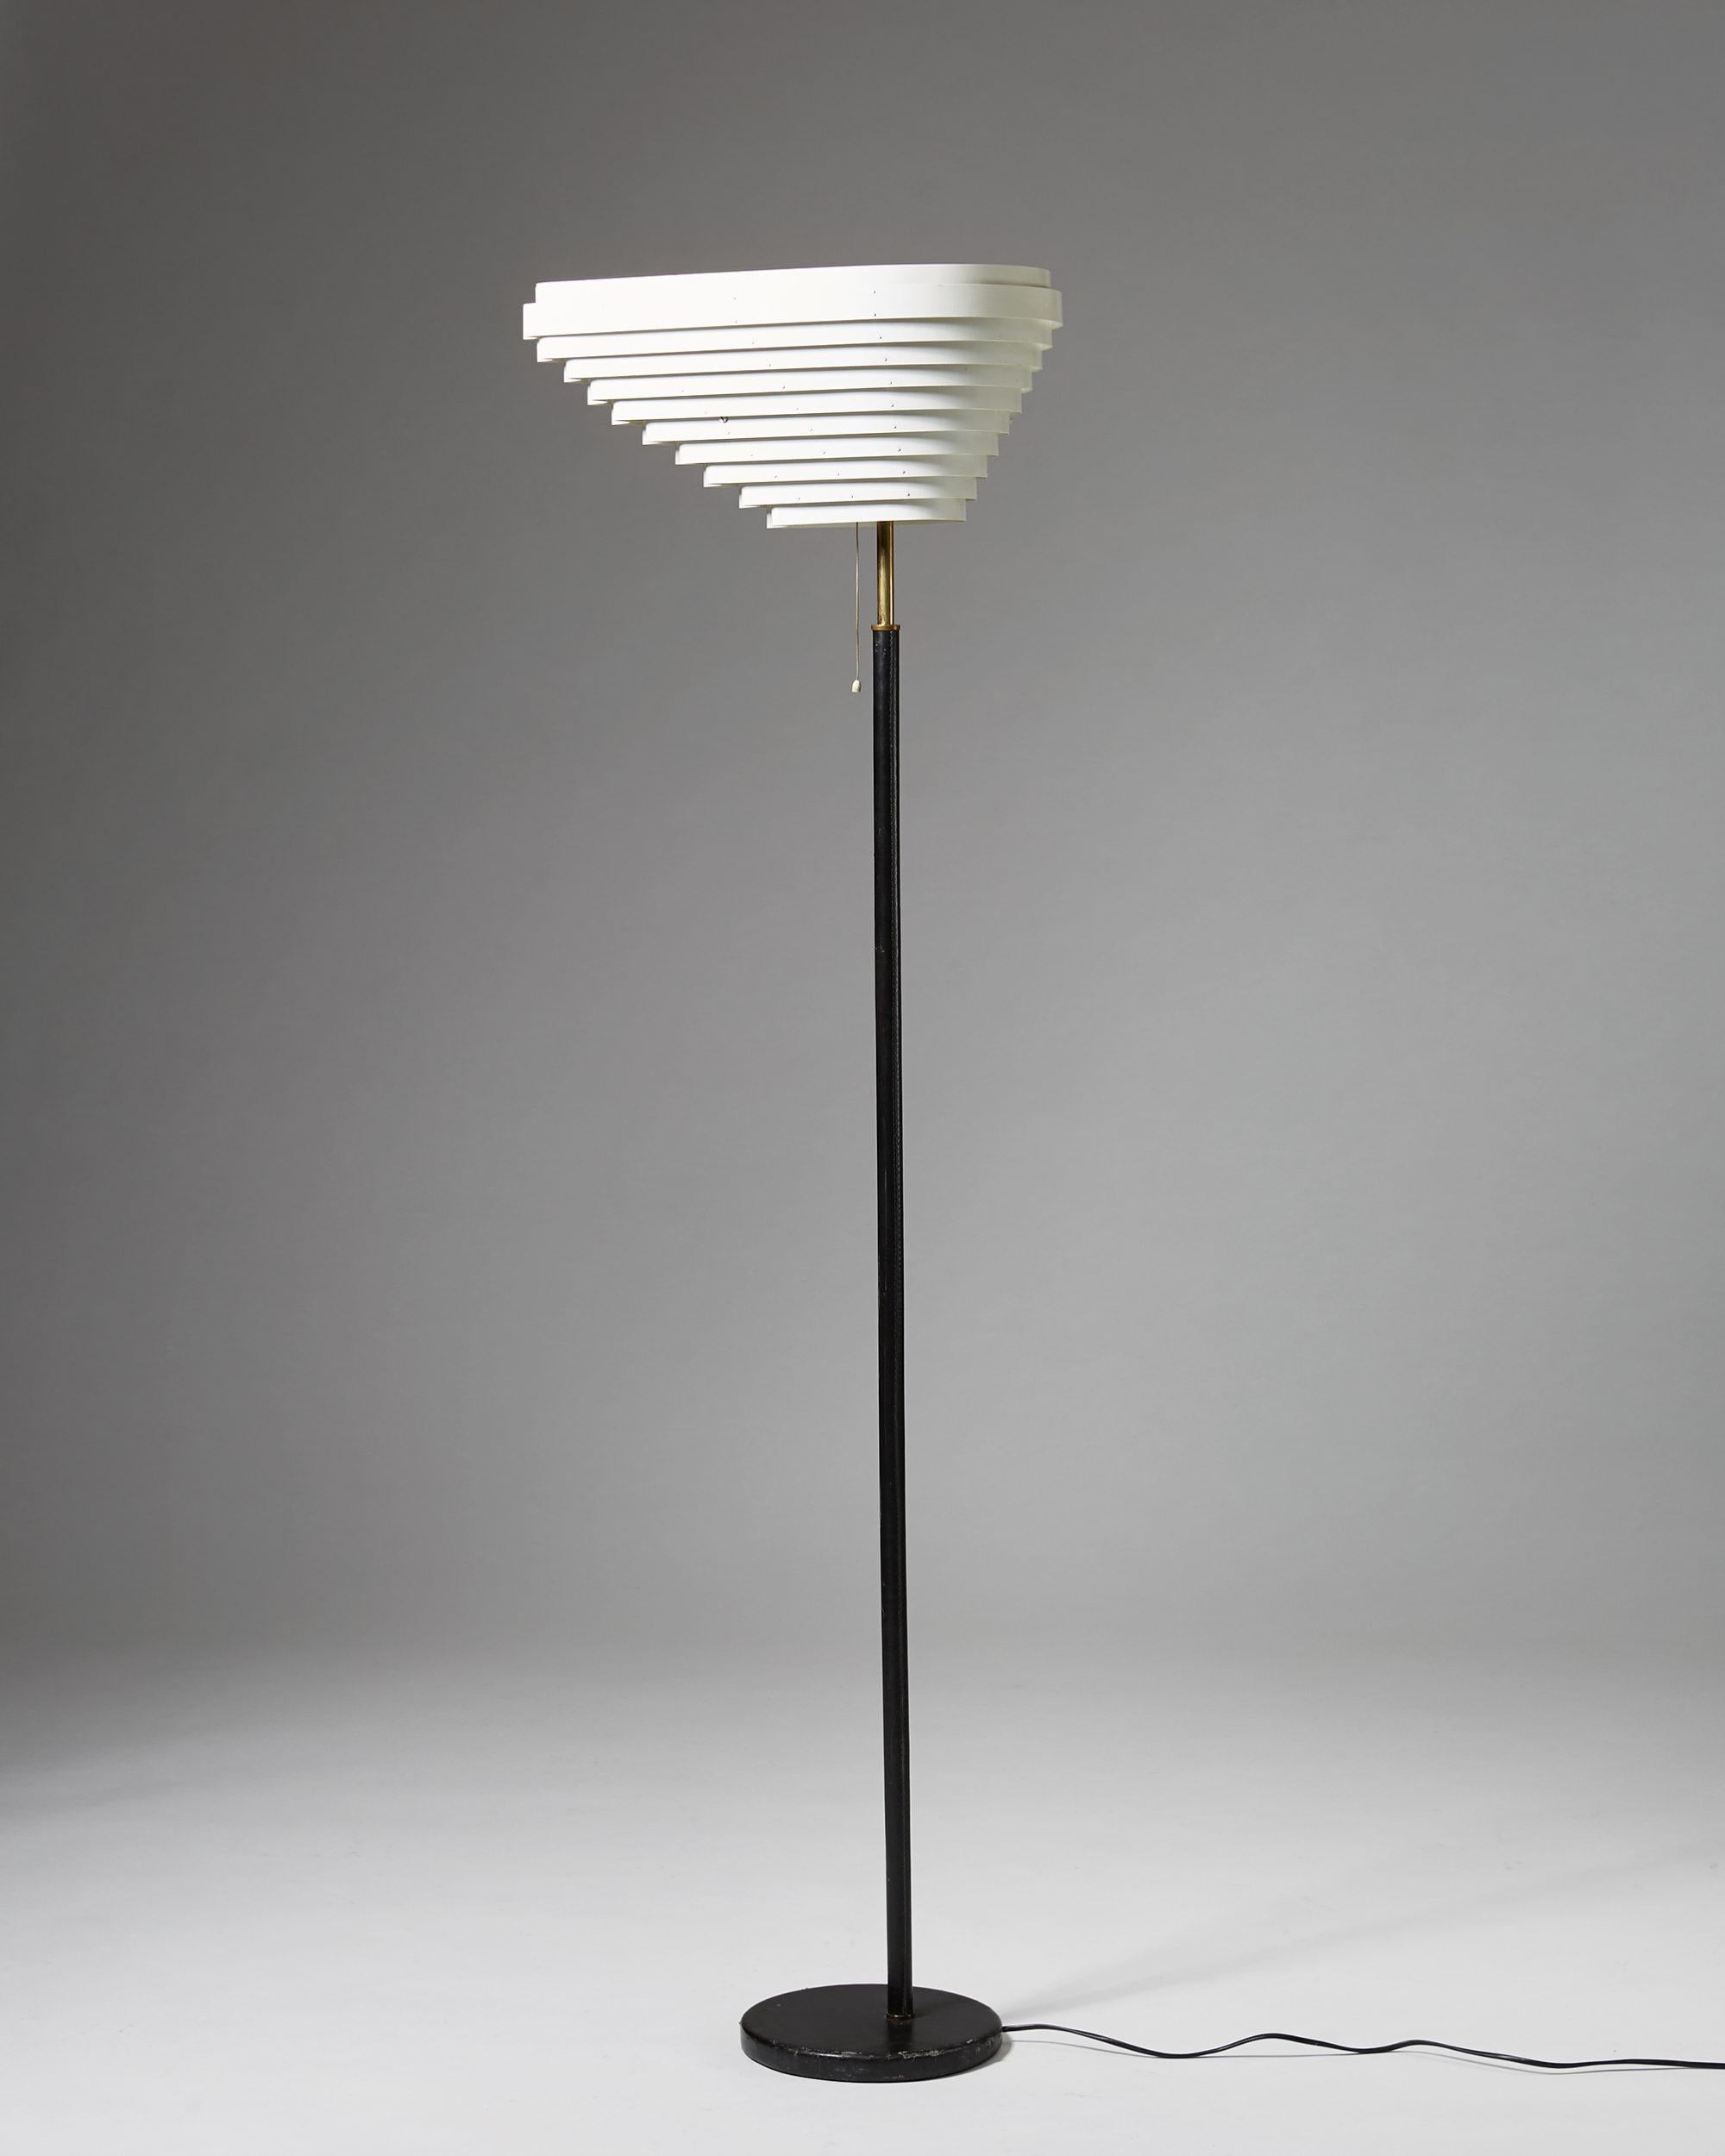 Shade white painted steel. Base and shaft covered with black leather. Polished brass fittings.

Measurements: 
H: 170,5 cm/ 5' 7 5/8''
W: 35 cm / 13 3/4''
D: 52 cm/ 20 1/2''

Alvar Aalto was a Finnish architect and designer. His work includes